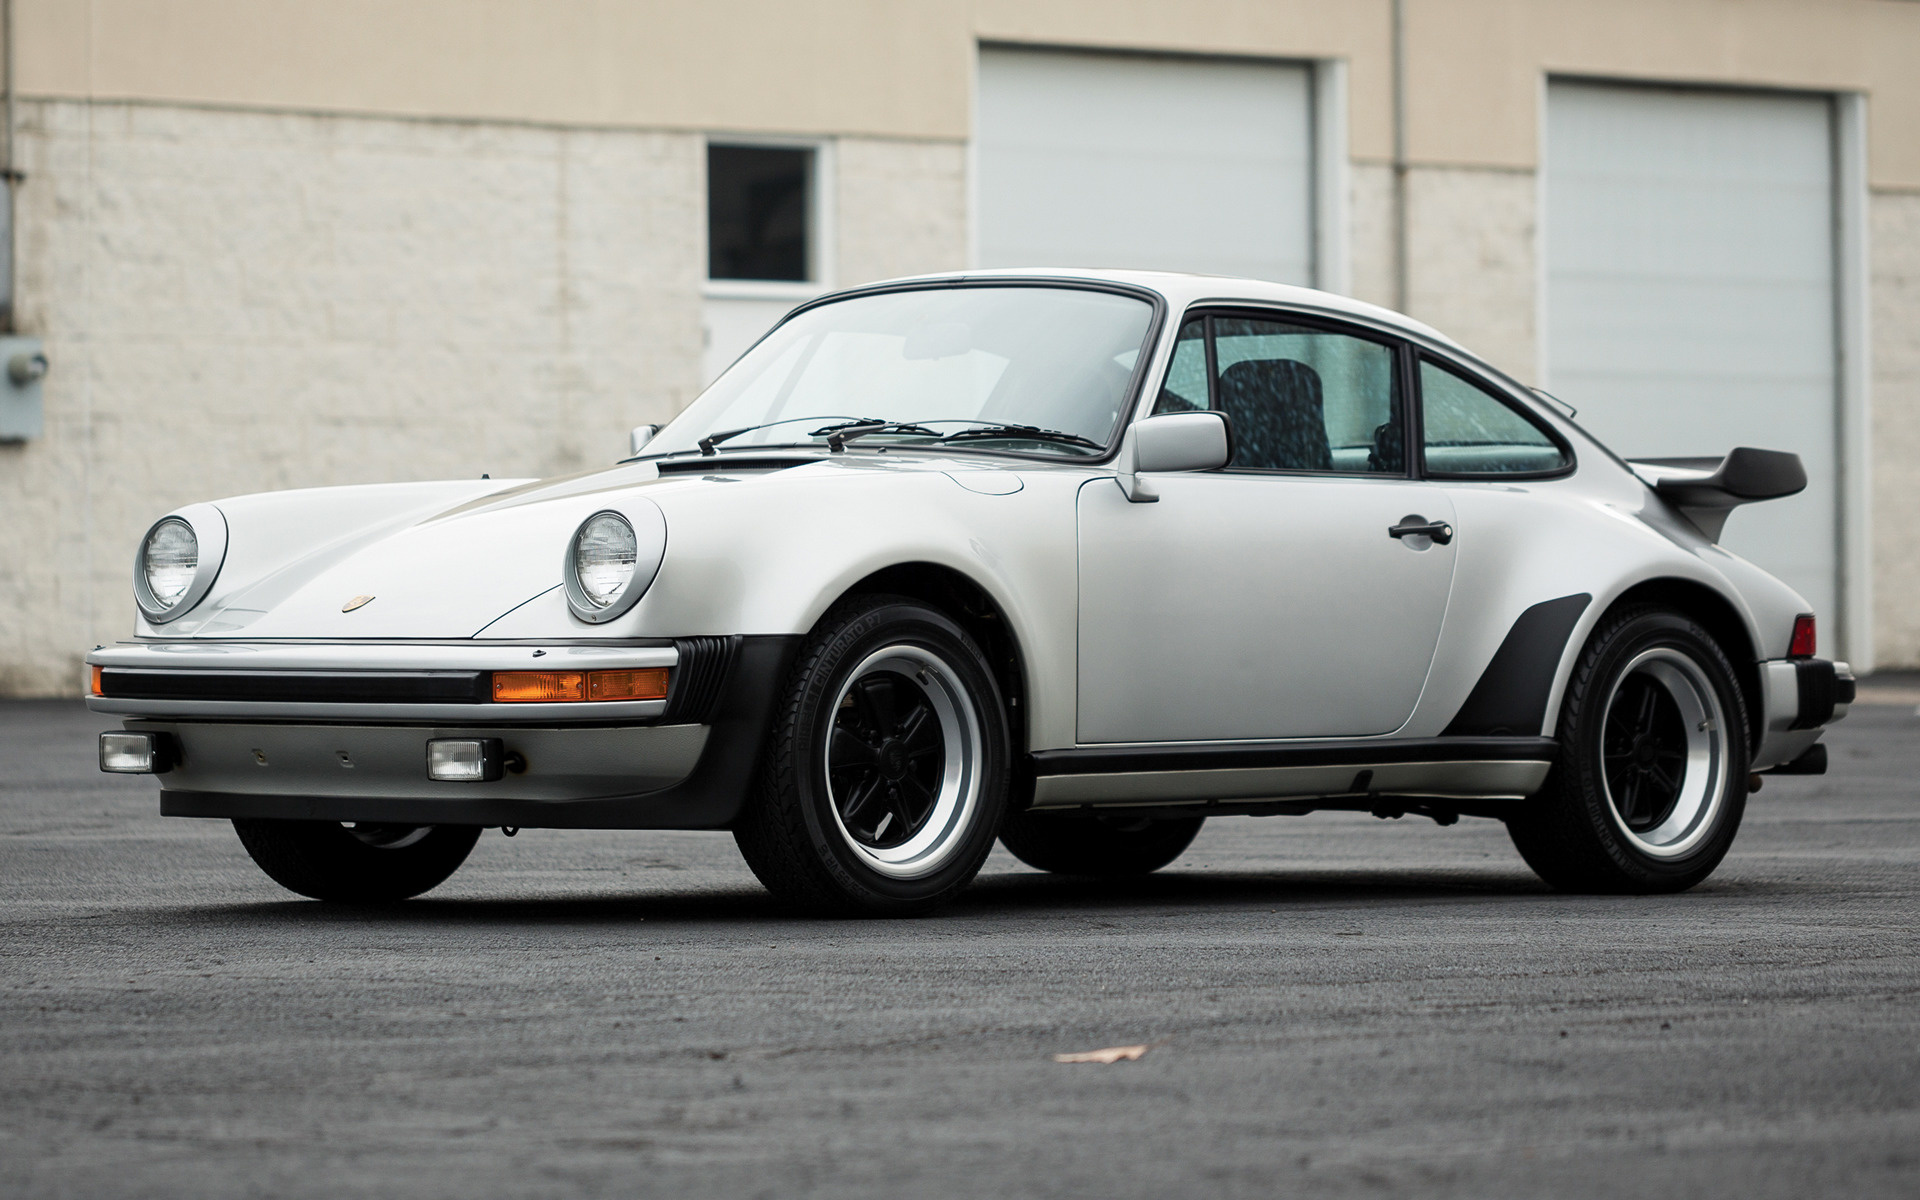 1977 Porsche 911 Turbo (US) - Wallpapers and HD Images | Car Pixel